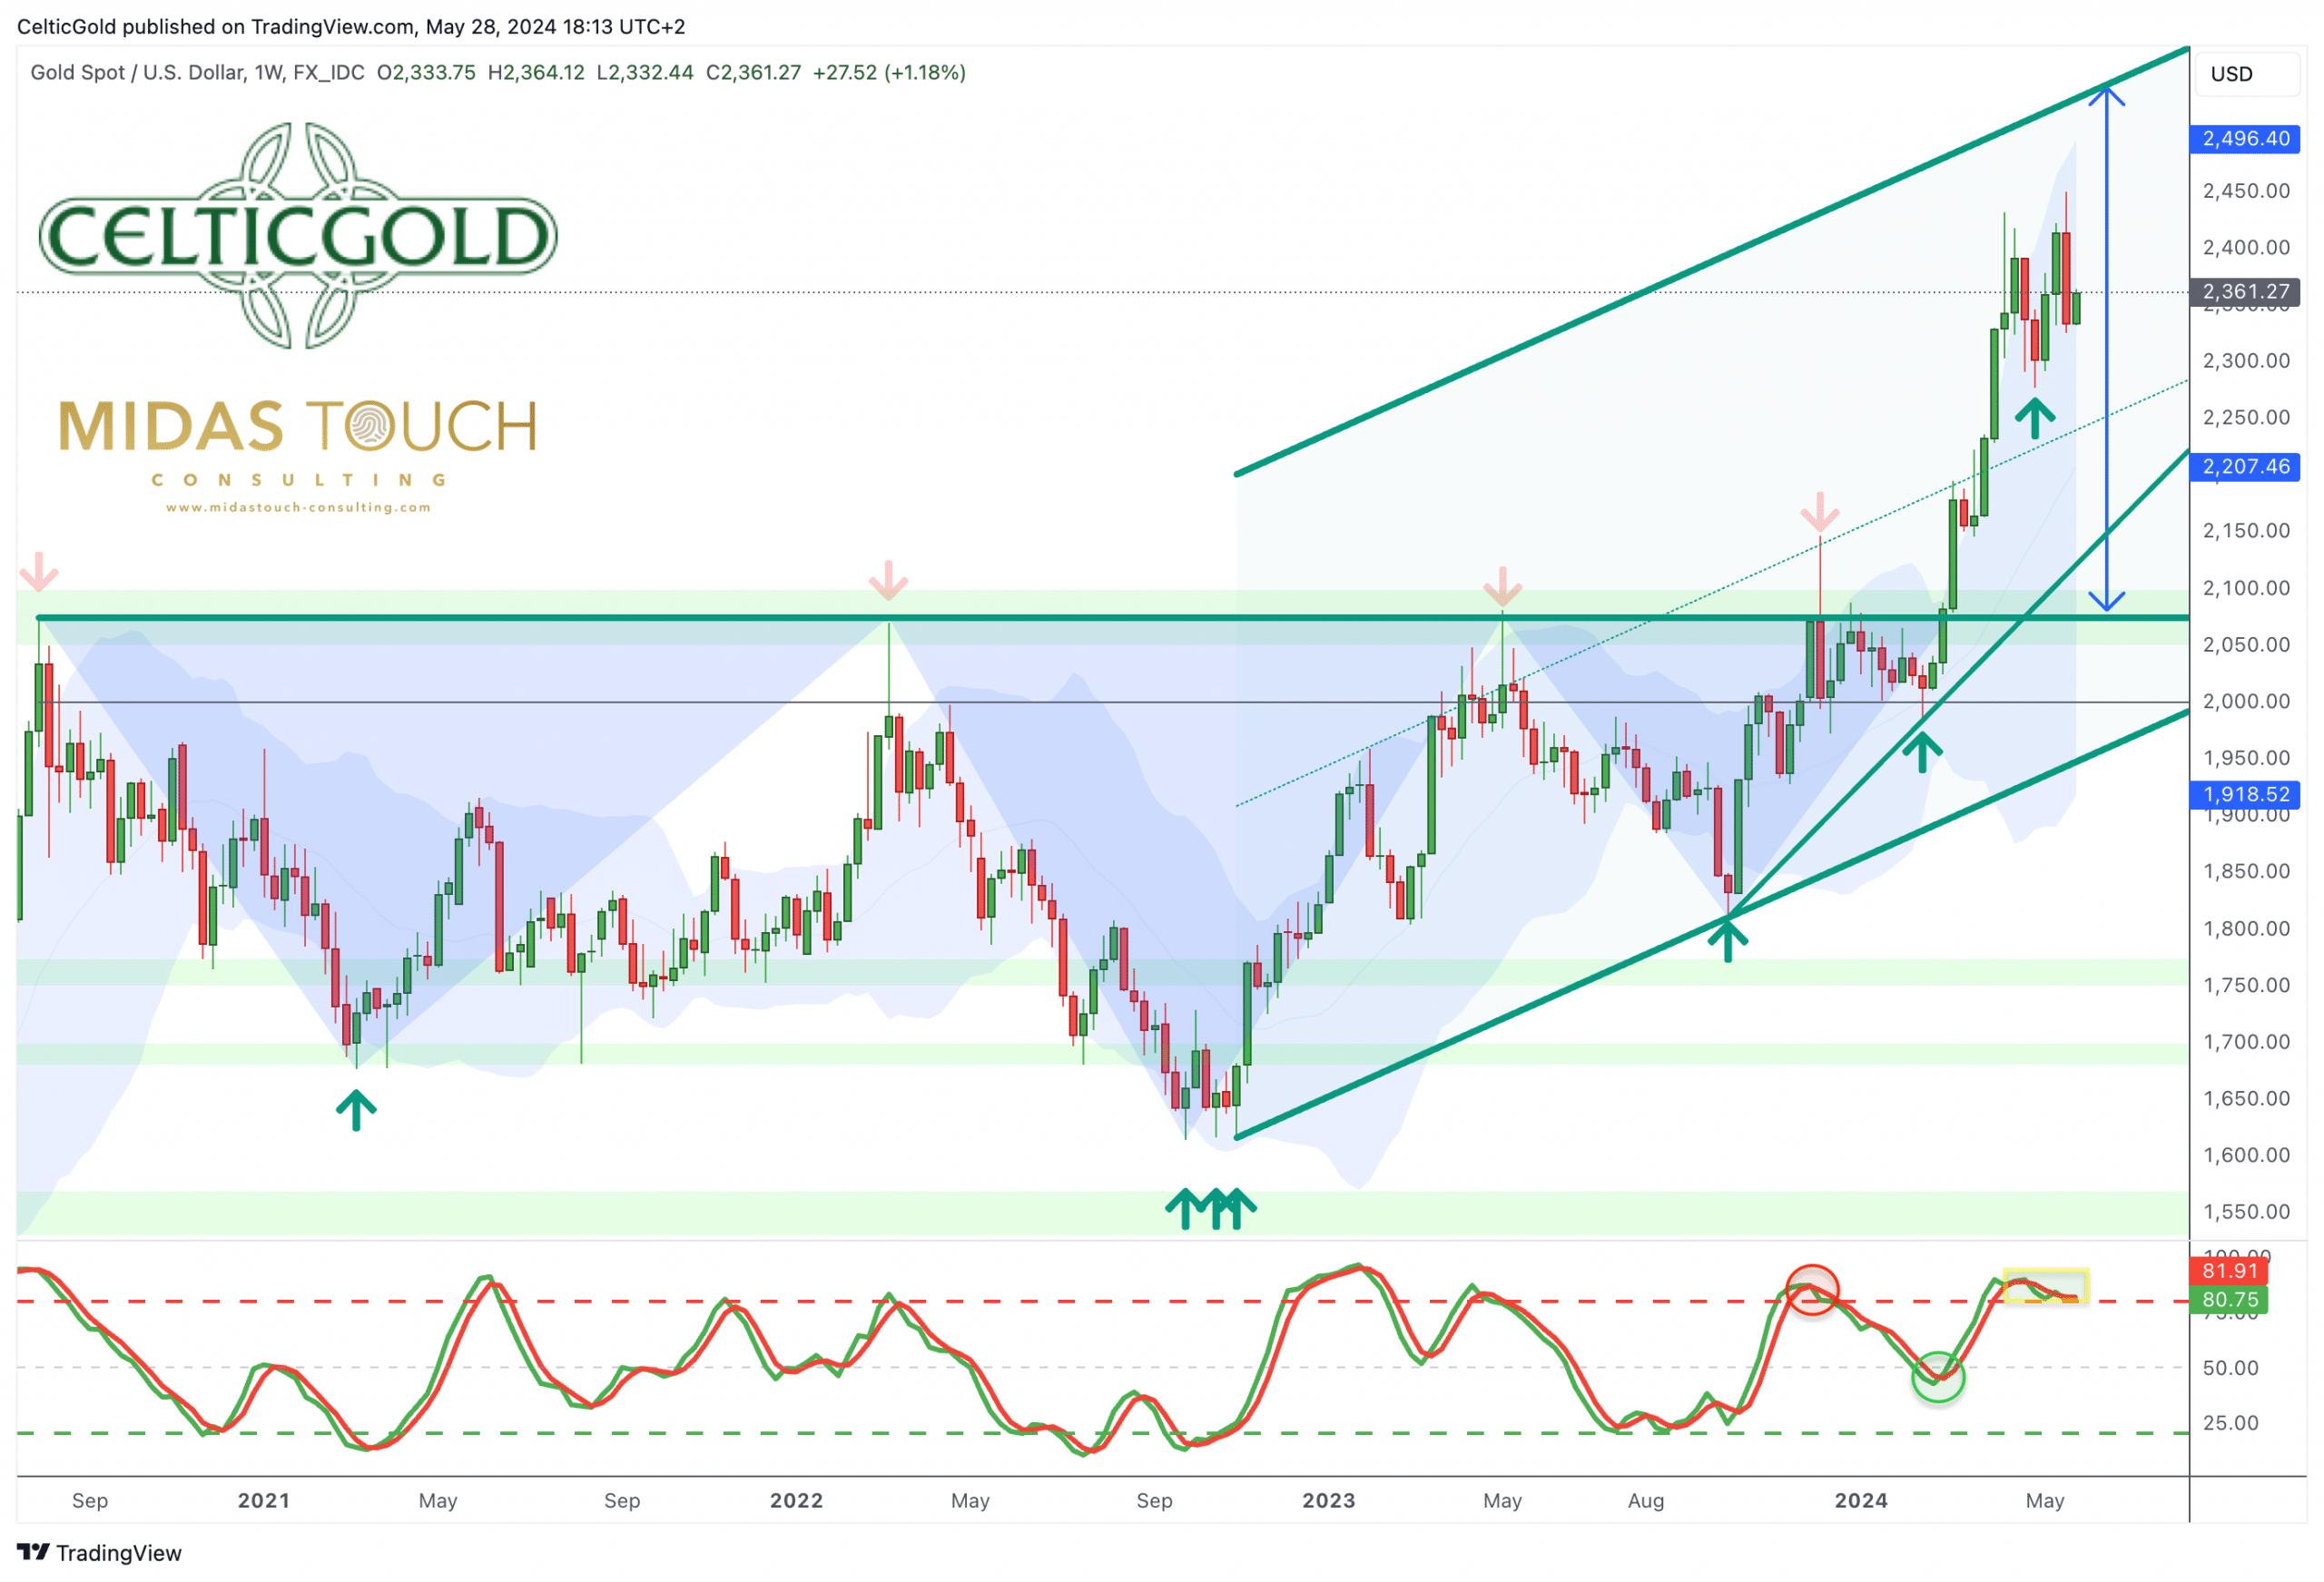 Gold In US-Dollar, Weekly Chart As Of May 28th, 2024